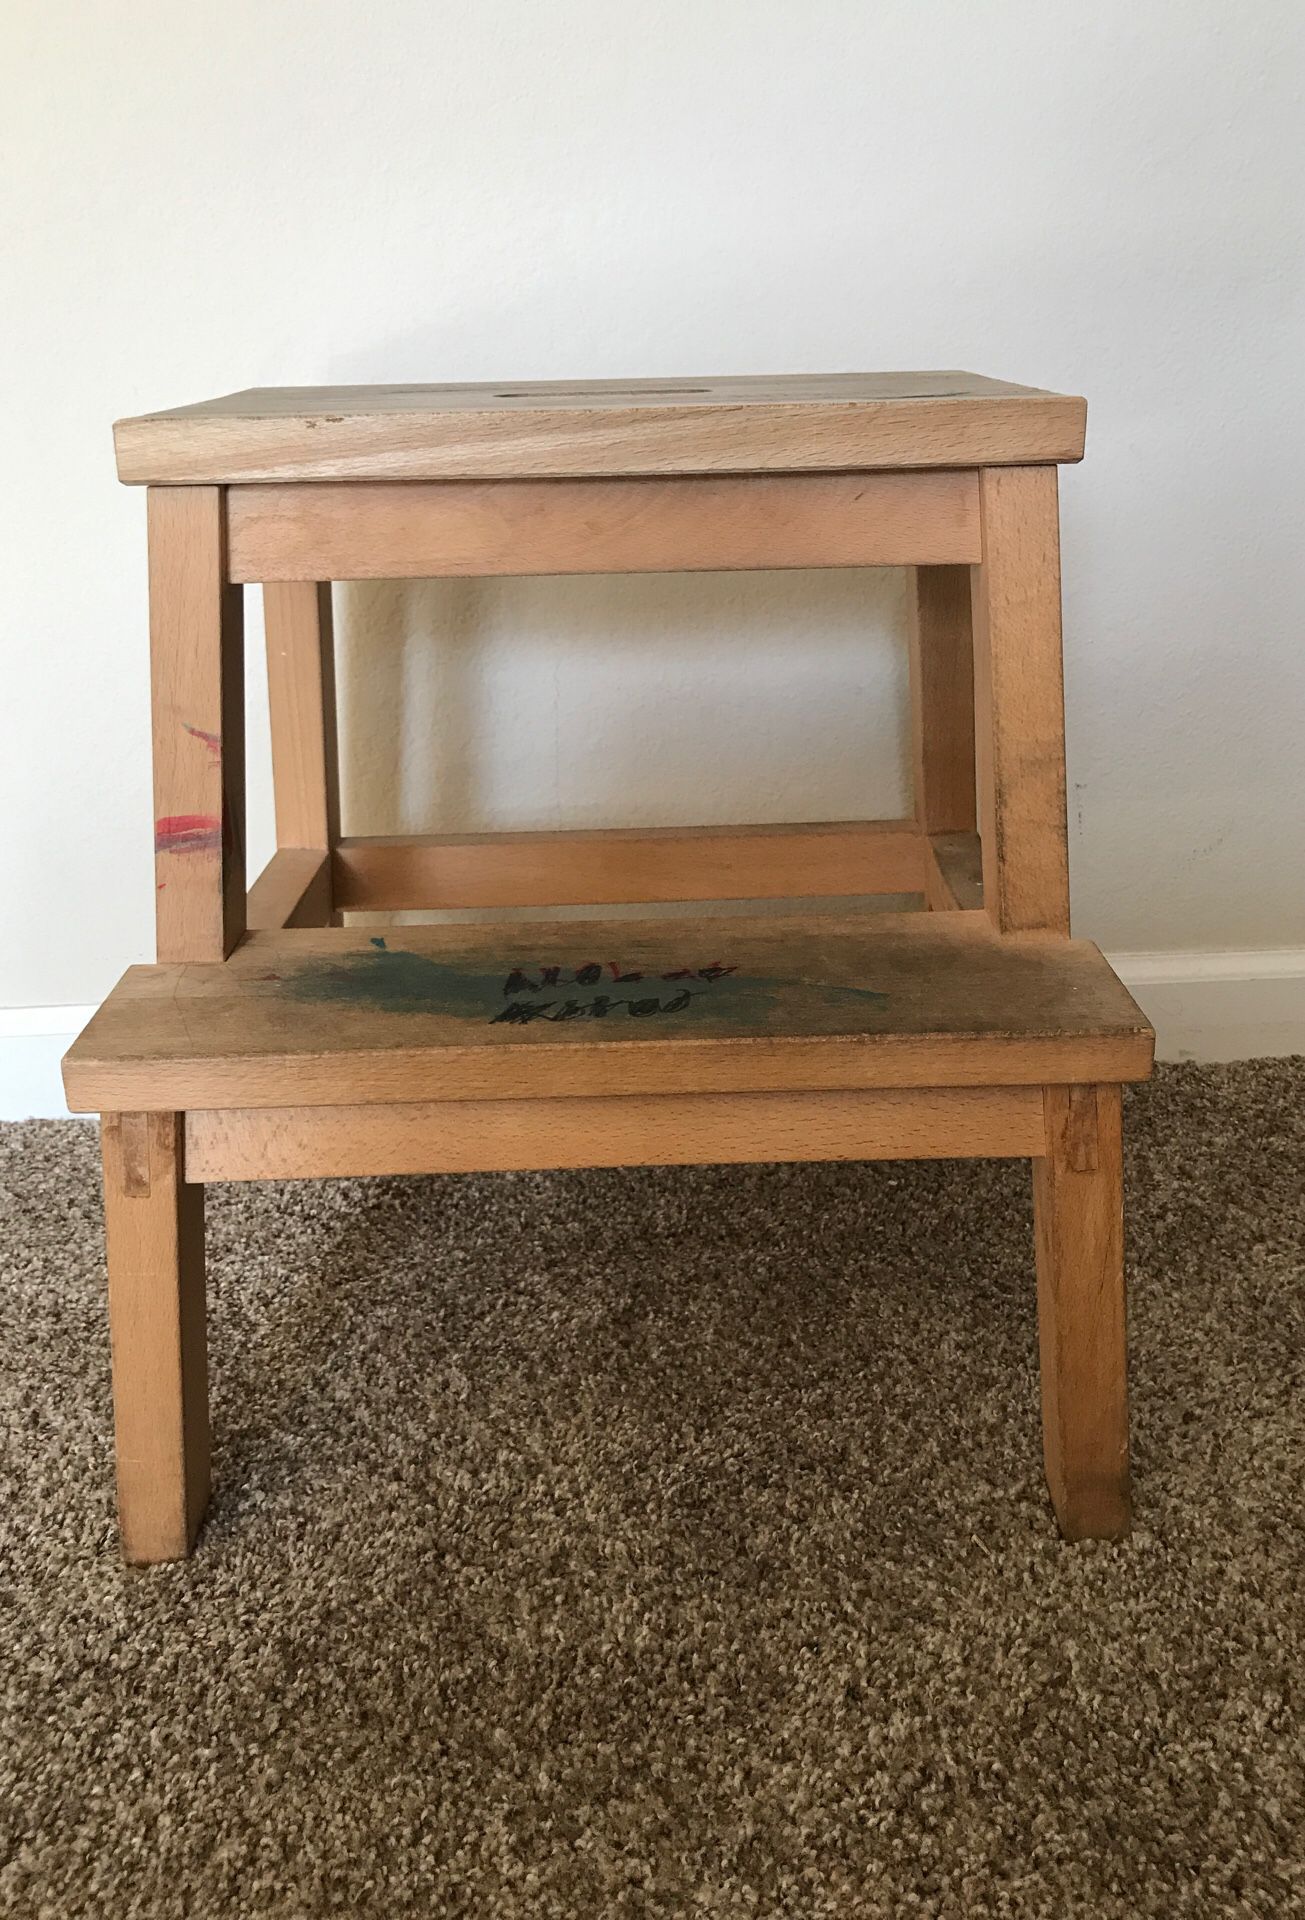 Solid wooden step stool.